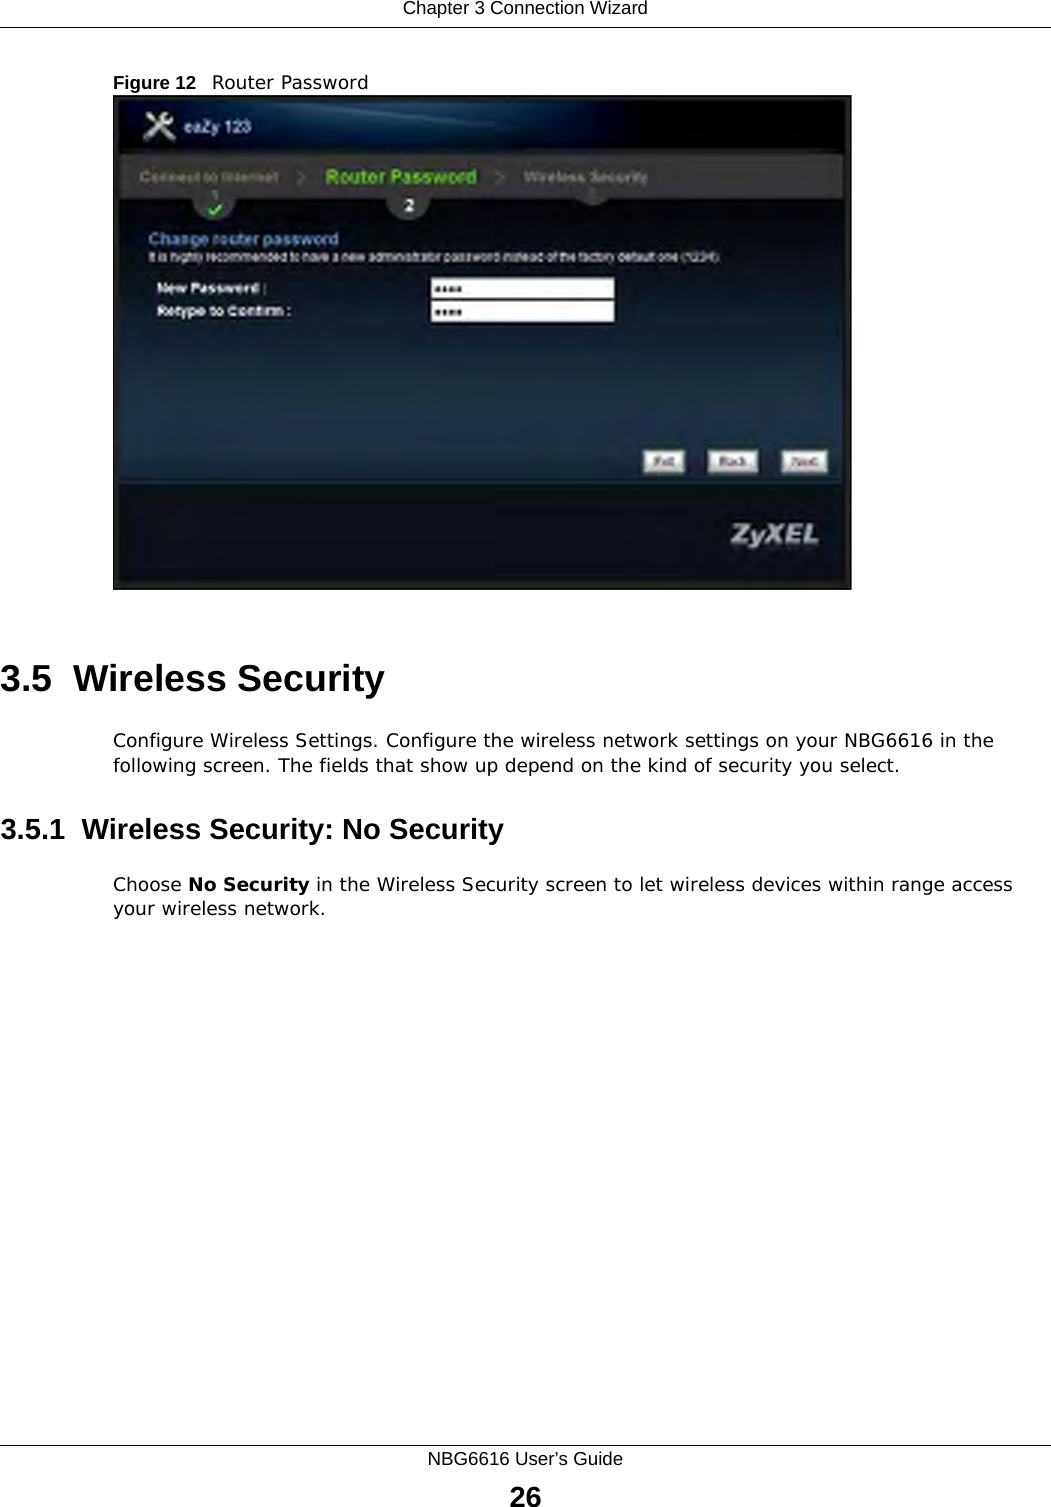 Chapter 3 Connection WizardNBG6616 User’s Guide26Figure 12   Router Password 3.5  Wireless SecurityConfigure Wireless Settings. Configure the wireless network settings on your NBG6616 in the following screen. The fields that show up depend on the kind of security you select.3.5.1  Wireless Security: No SecurityChoose No Security in the Wireless Security screen to let wireless devices within range access your wireless network.